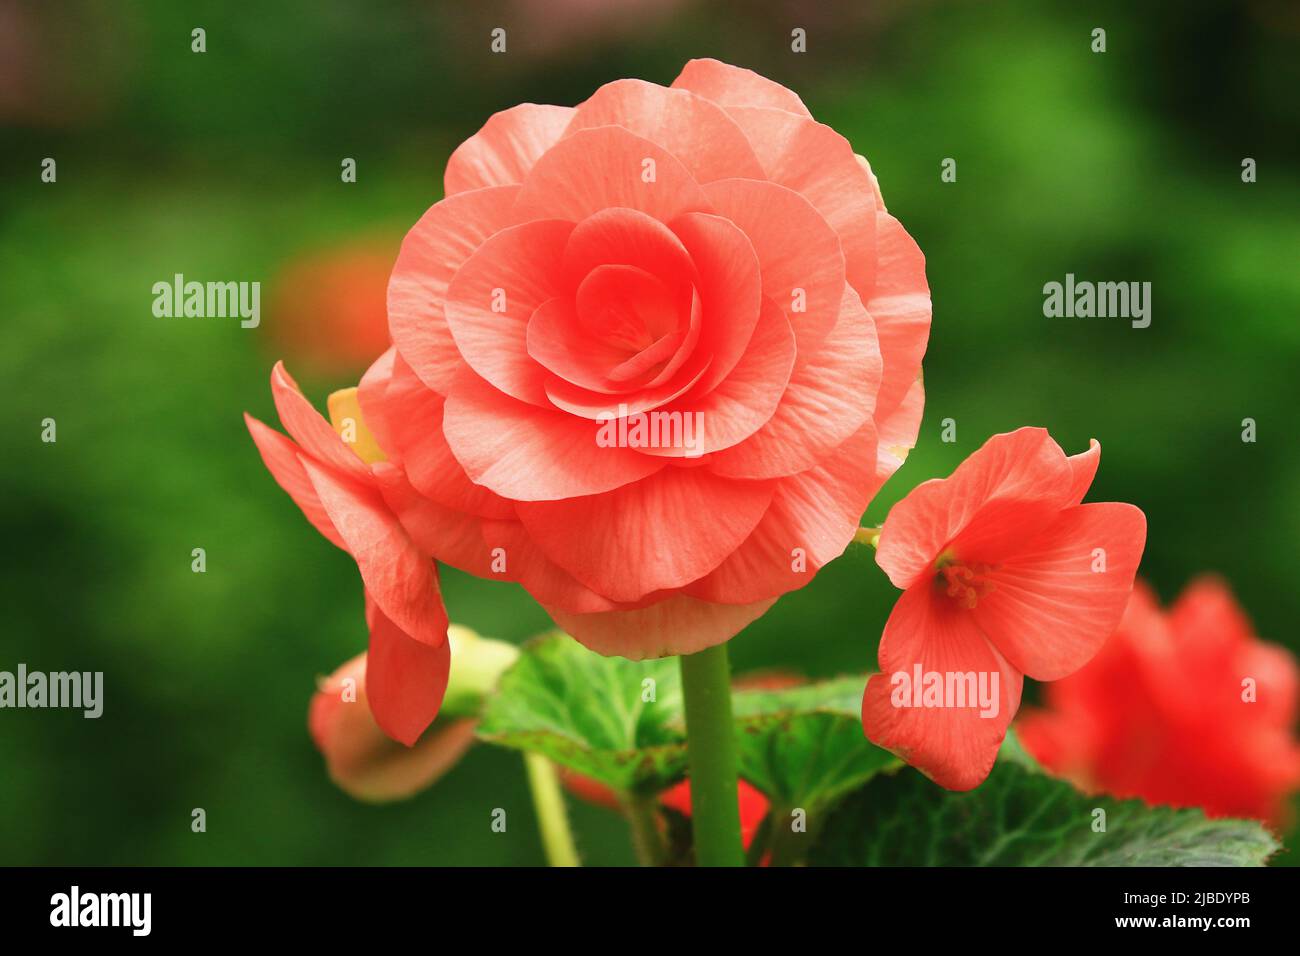 blooming colorful Begonia flowers,close-up of red with yellow Begonia flowers blooming in the garden Stock Photo